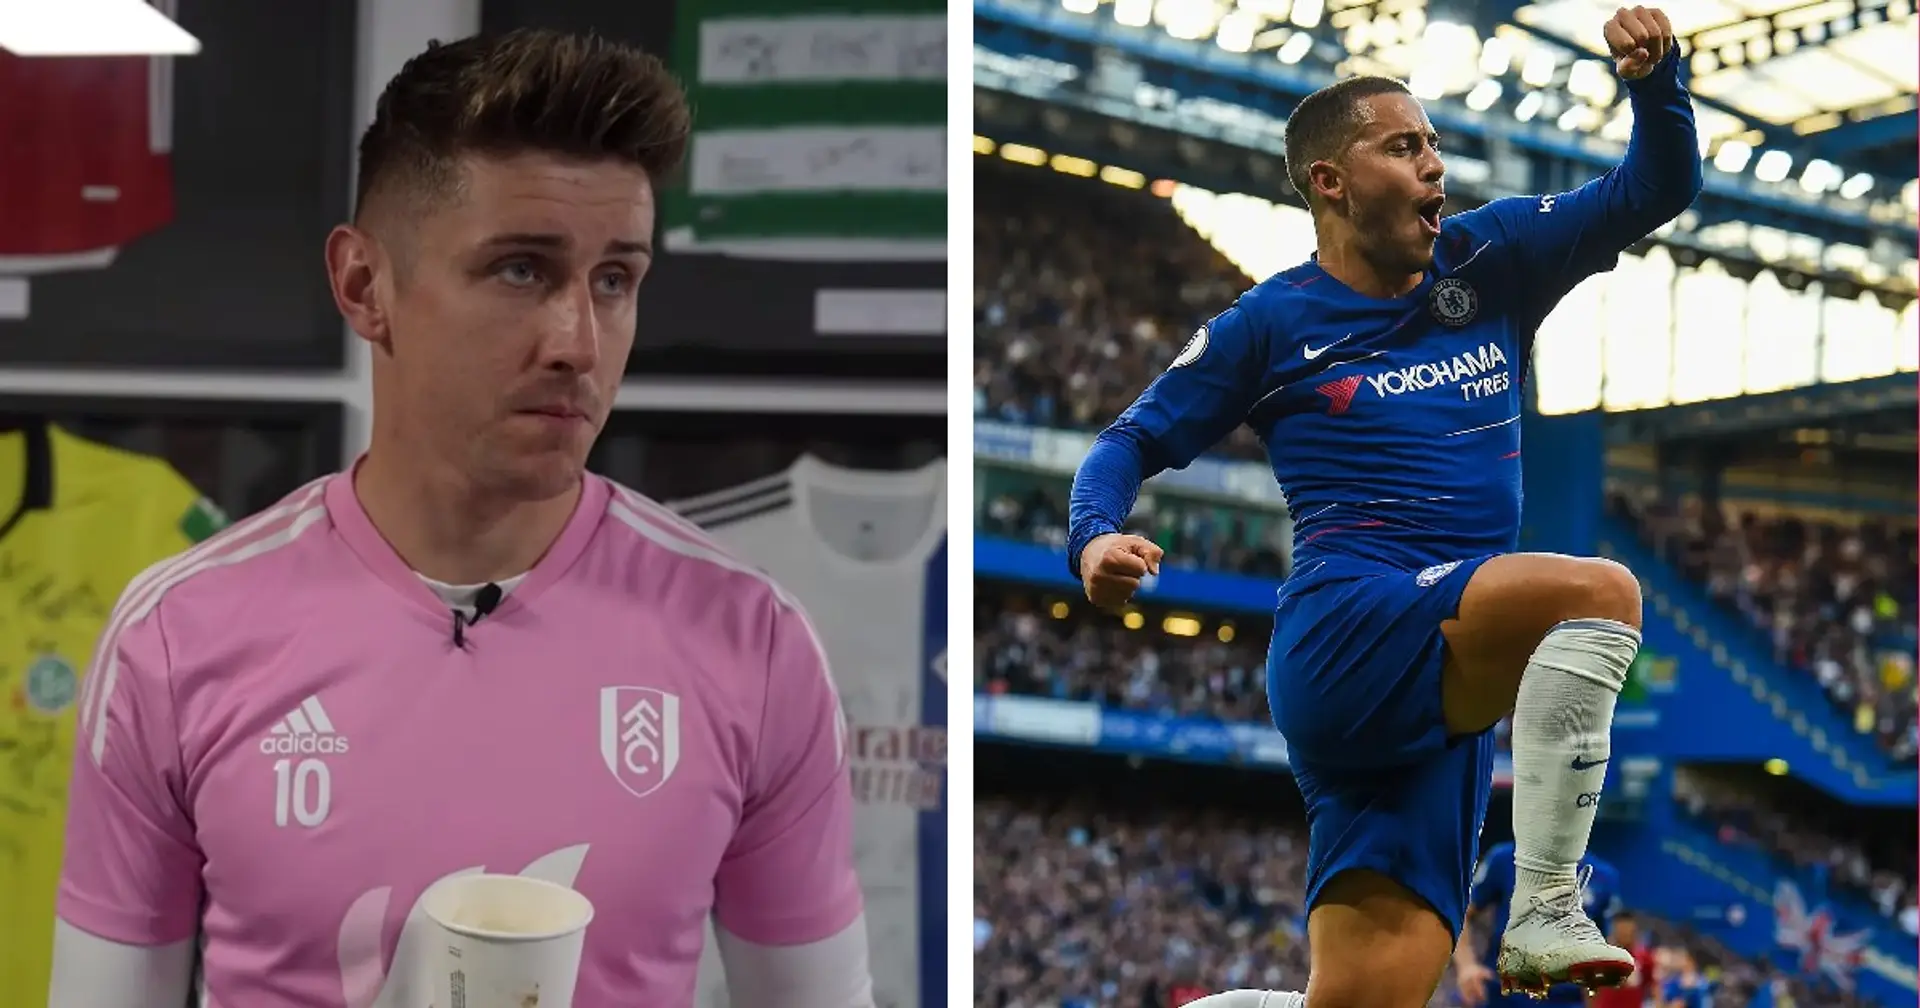 Fulham midfielder names Chelsea winger that 'didn't get the recognition he deserved due to Hazard